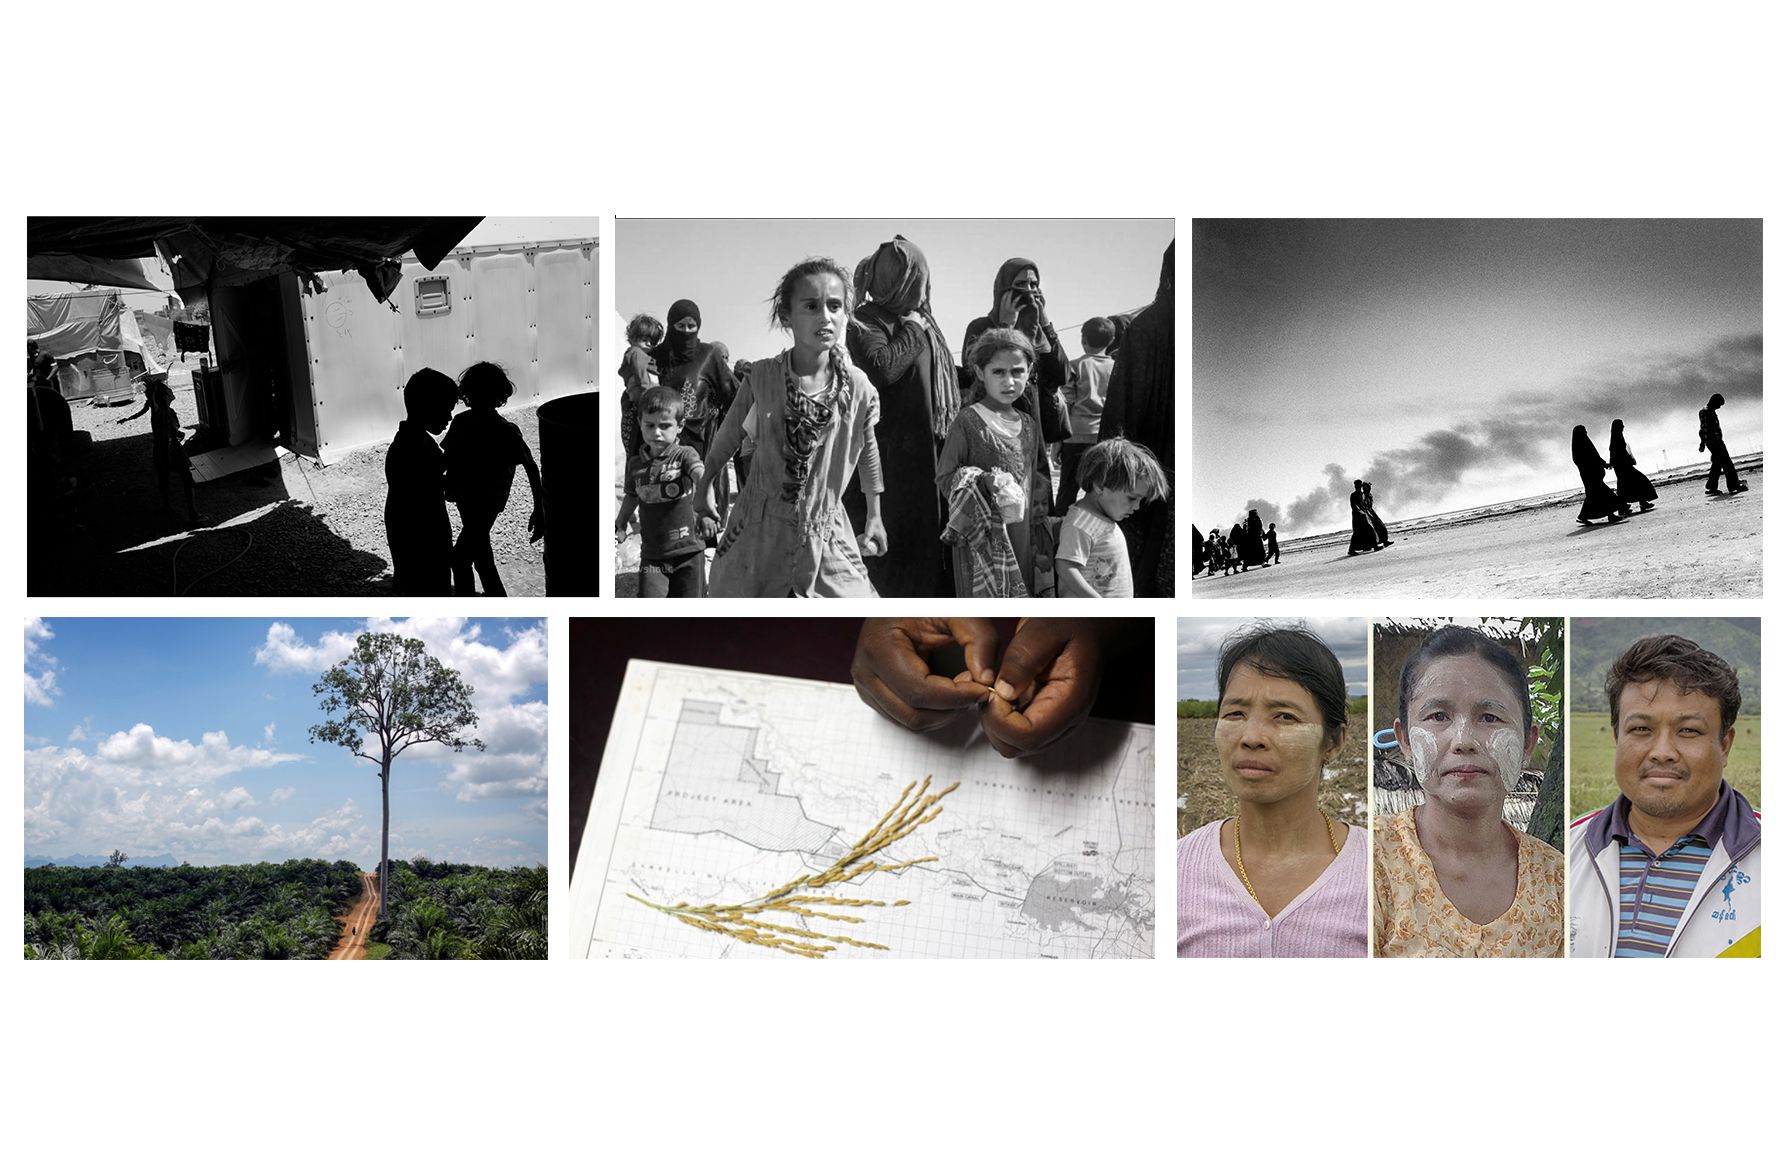 Top three images by Paolo Pellegrin for "Fractured Lands" NYT Magazine project. Bottom three images from "The Great Land Rush" FT project. Collage by Lauren Shepherd. United States, 2017.